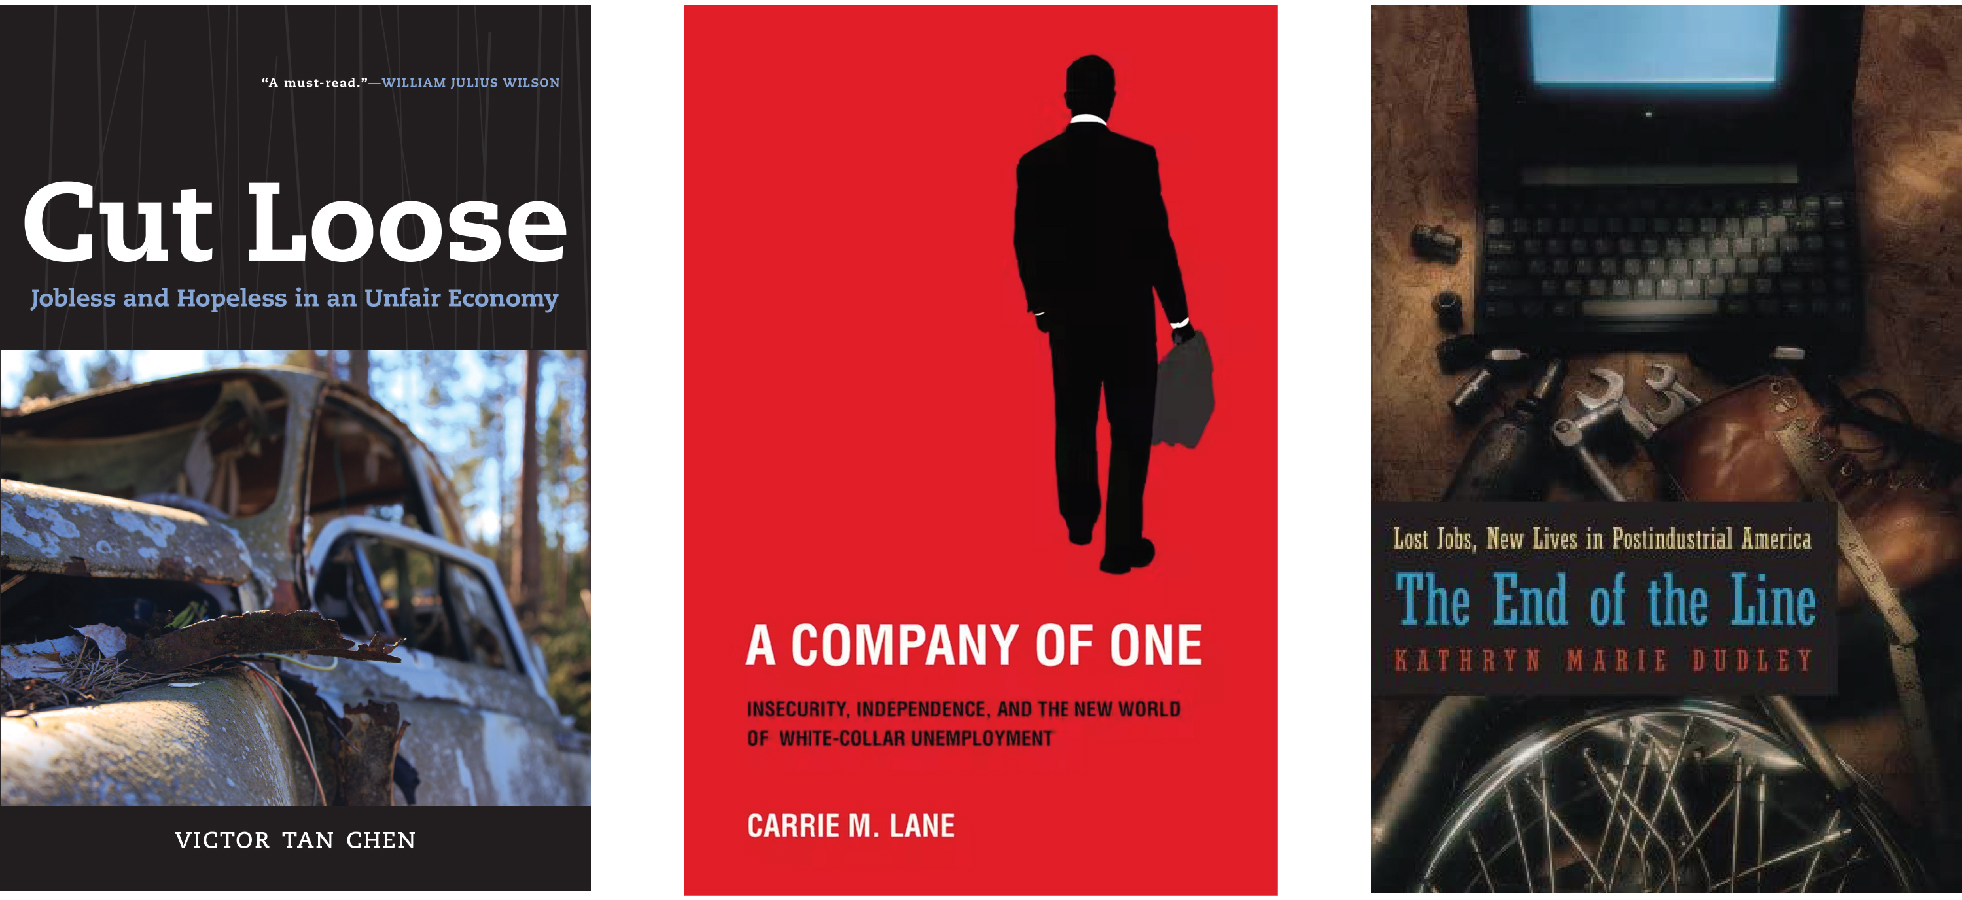 Book covers of Cut Loose, A Company of One, and The End of the Line.